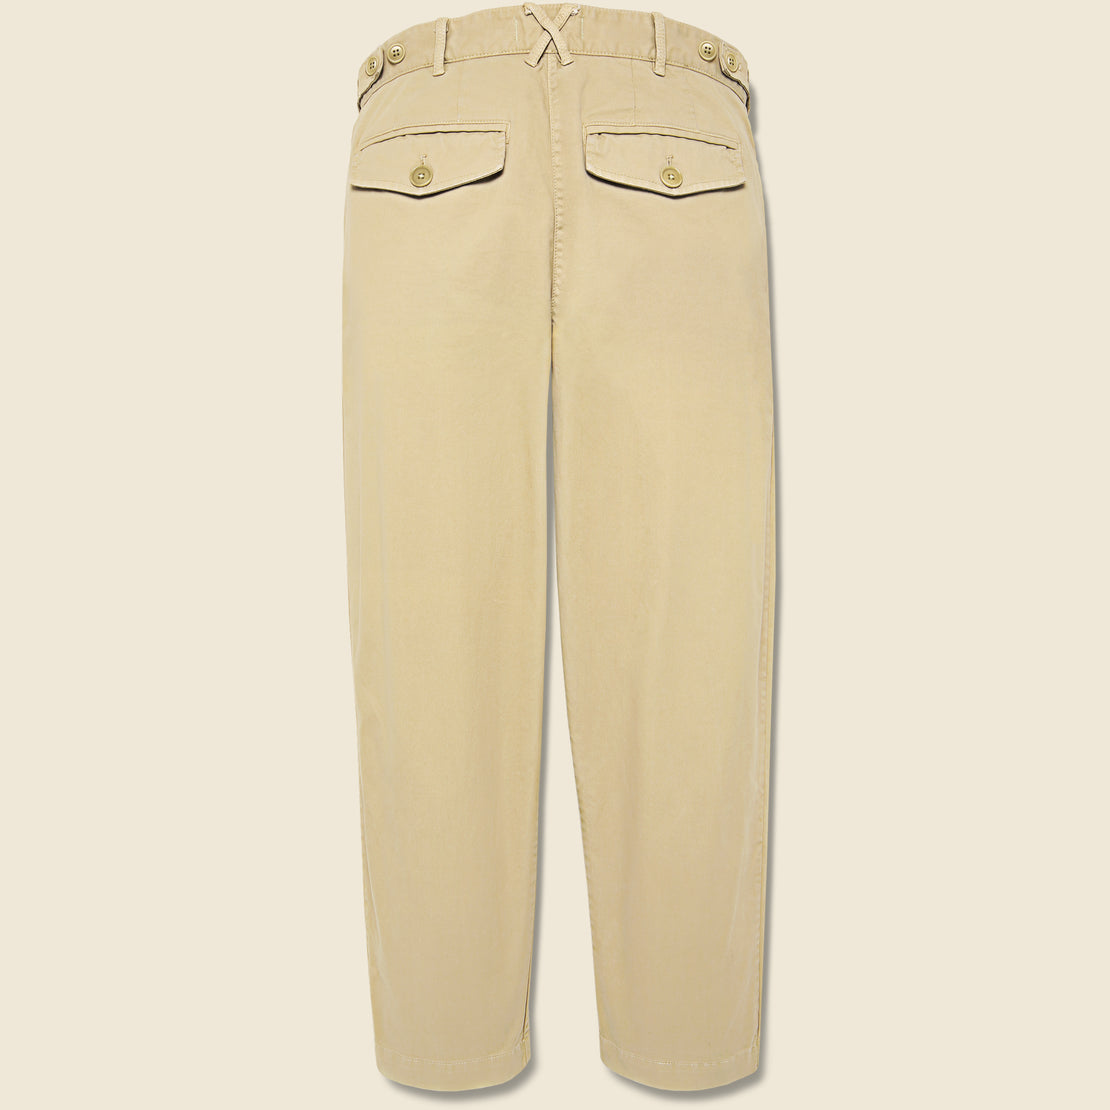 Flat Front Chino - Vintage Khaki - Alex Mill - STAG Provisions - Pants - Twill